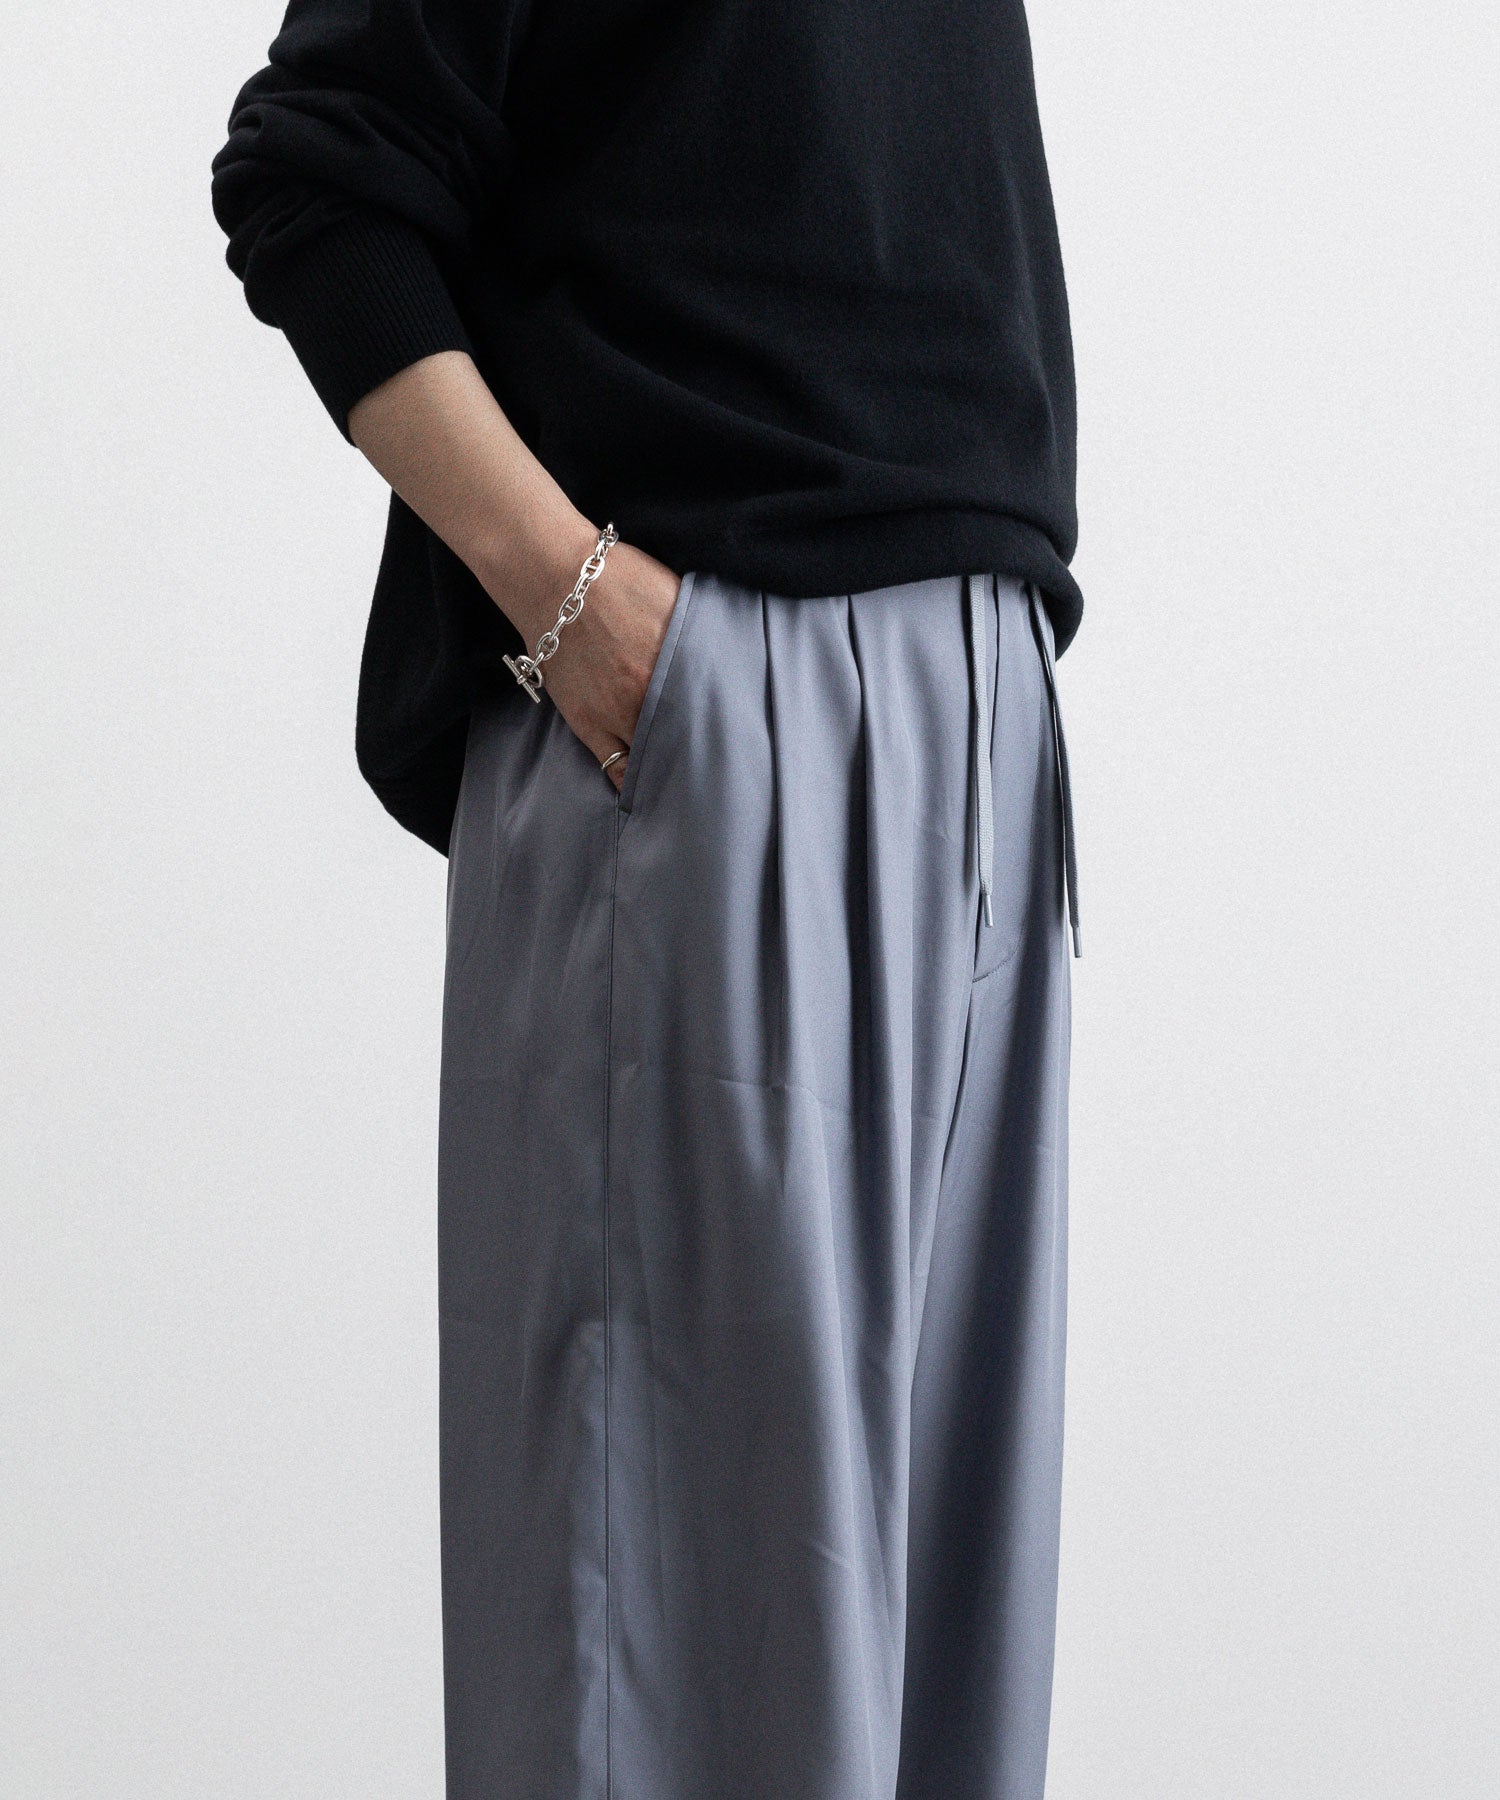 【stein】CUPRO WIDE EASY TROUSERS -  BLUE GREY シュタイン 23SS session セッション 福岡セレクトショップ 公式通販サイト